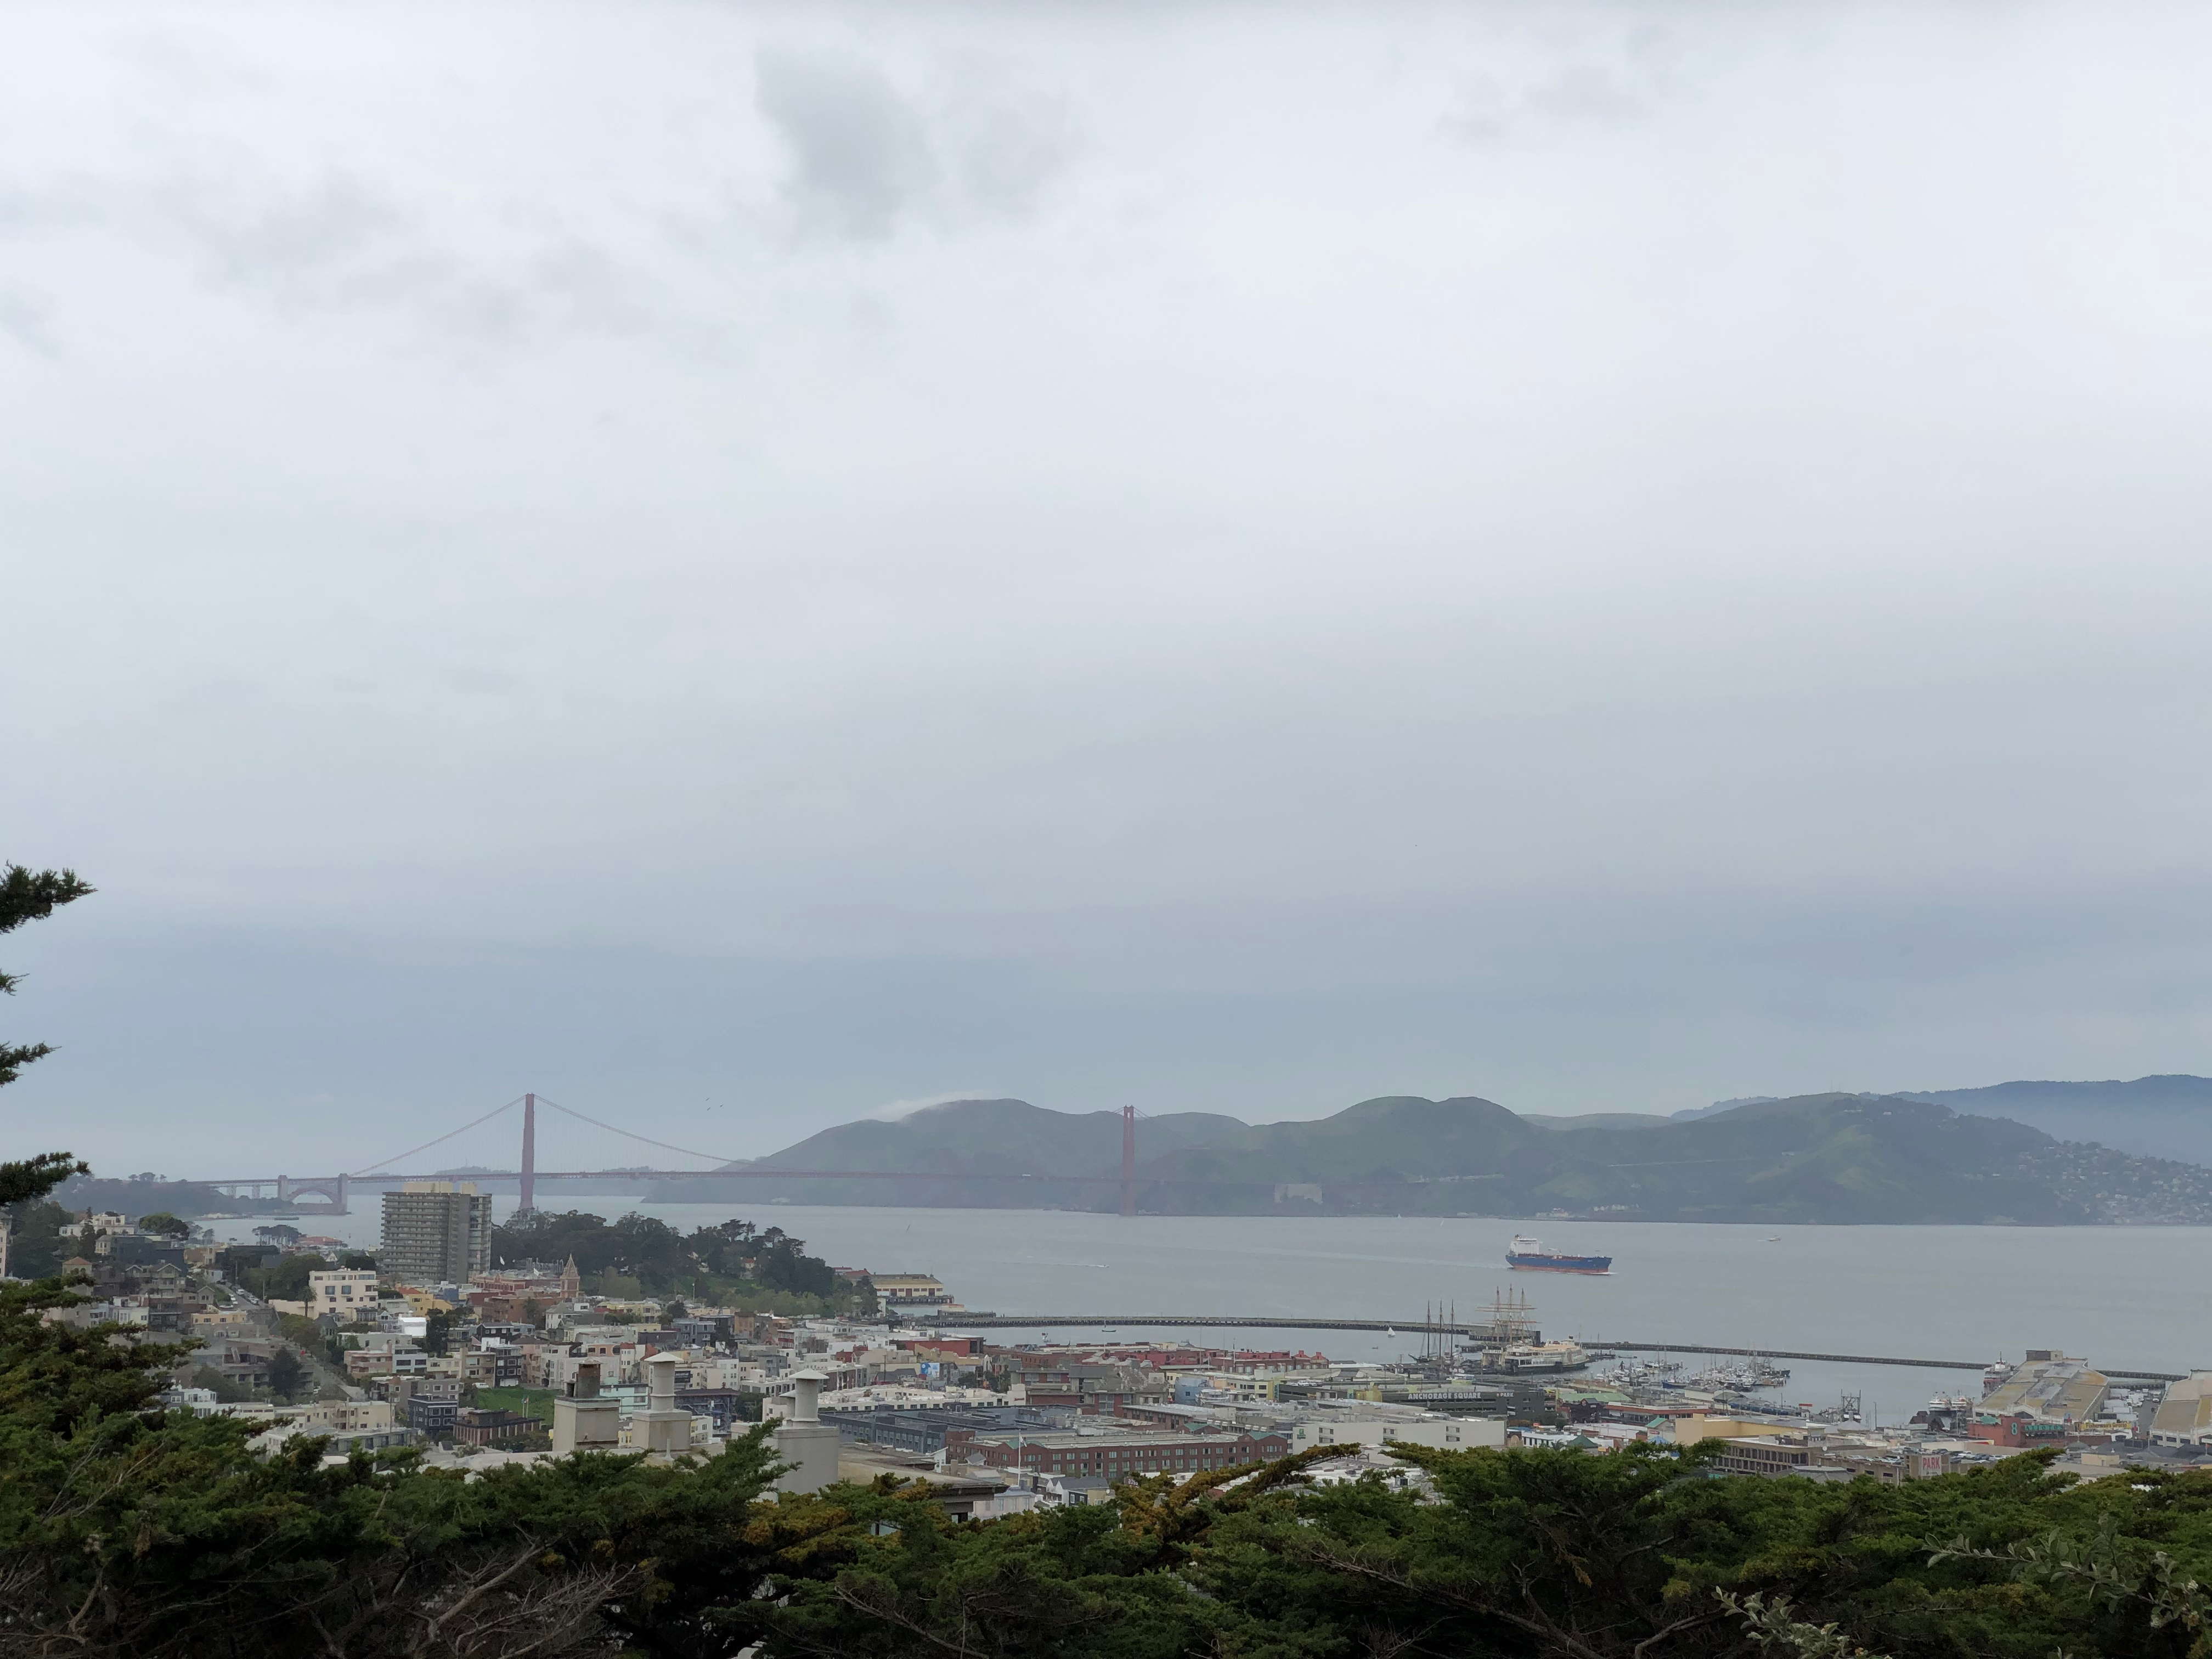 View of the Golden Gate Bridge from Telegraph Hill